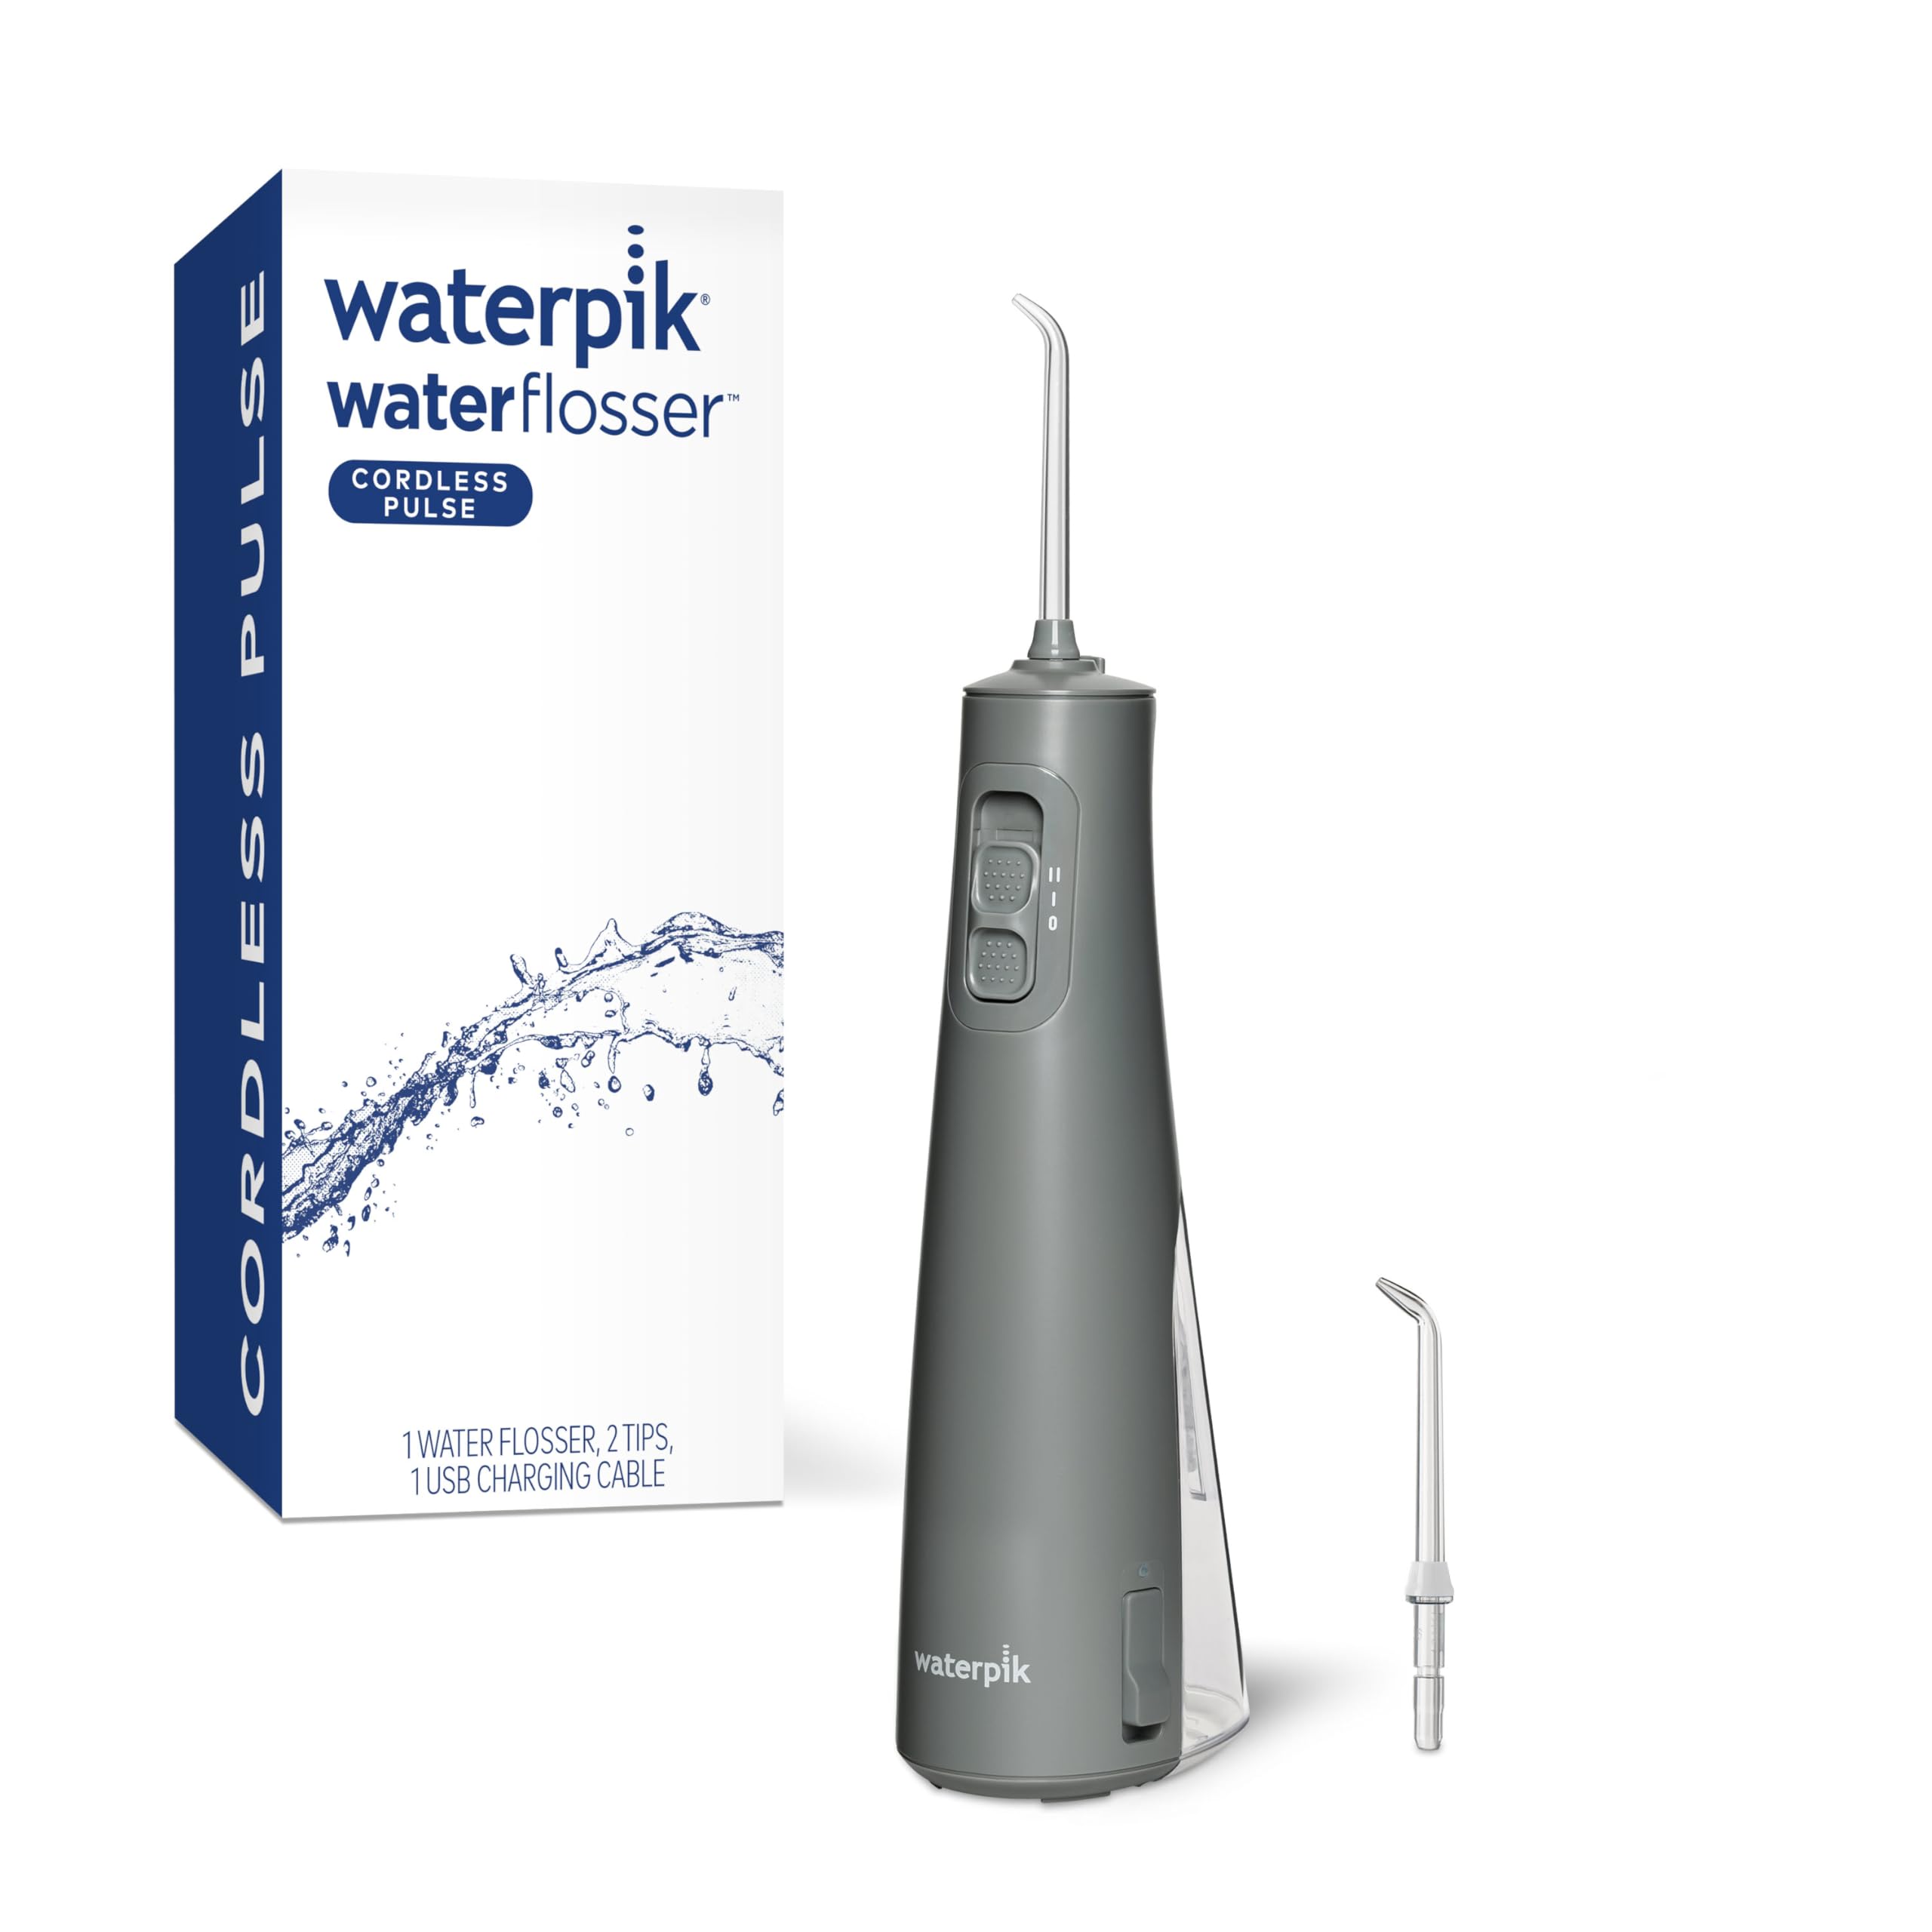 Waterpik Cordless Pulse Rechargeable Portable Water Flosser for Teeth, Gums, Braces Care and Travel with 2 Flossing Tips, Waterproof, ADA Accepted, WF-20 Gray